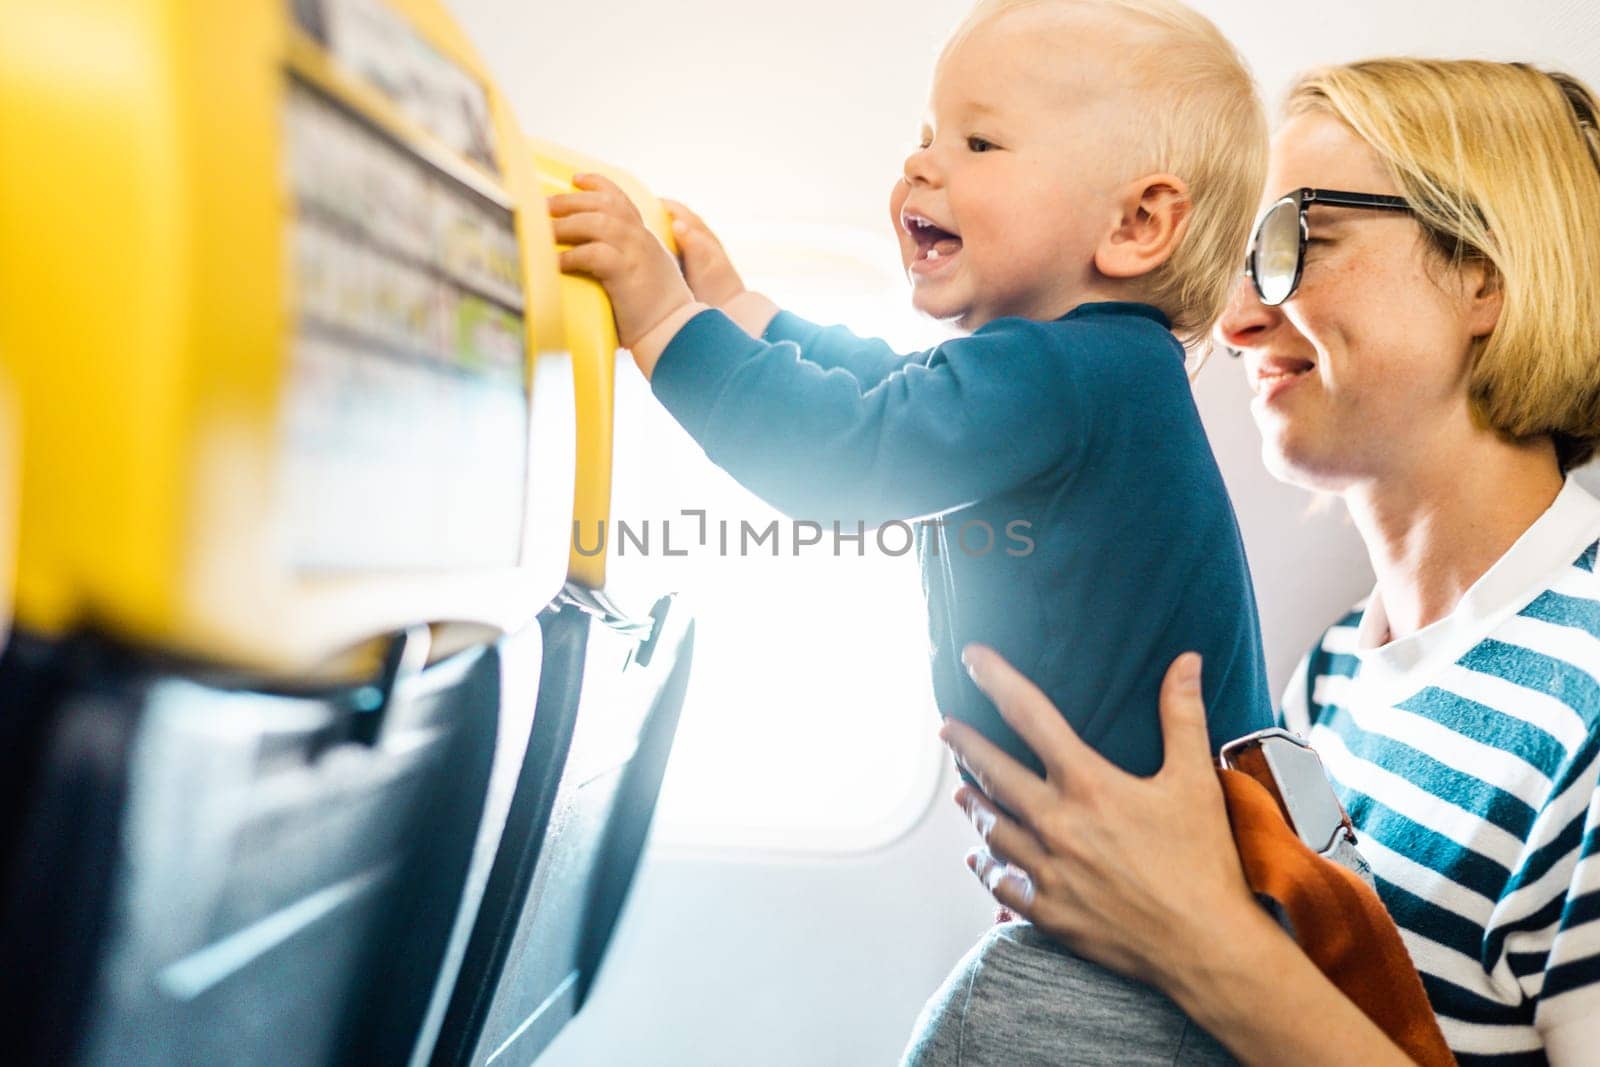 Mom and child flying by plane. Mother holding and playing with her infant baby boy child in her lap during economy comercial flight. Concept photo of air travel with baby. Real people